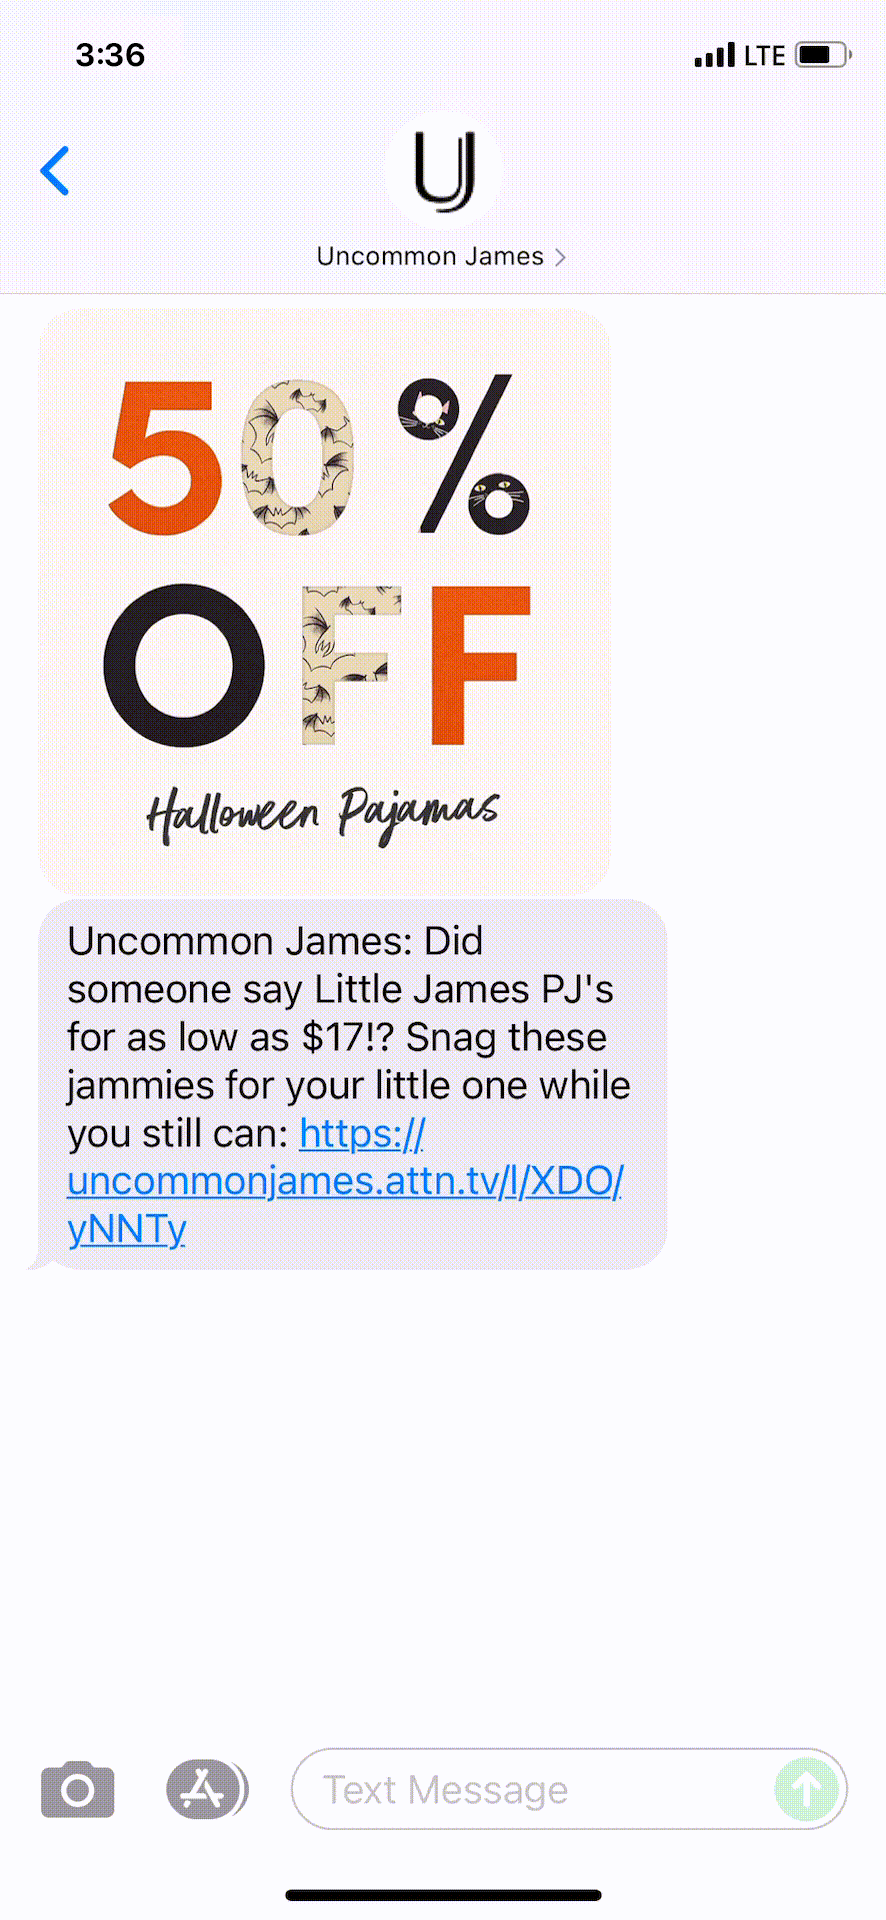 Uncommon-James-Text-Message-Marketing-Example-10.22.2021